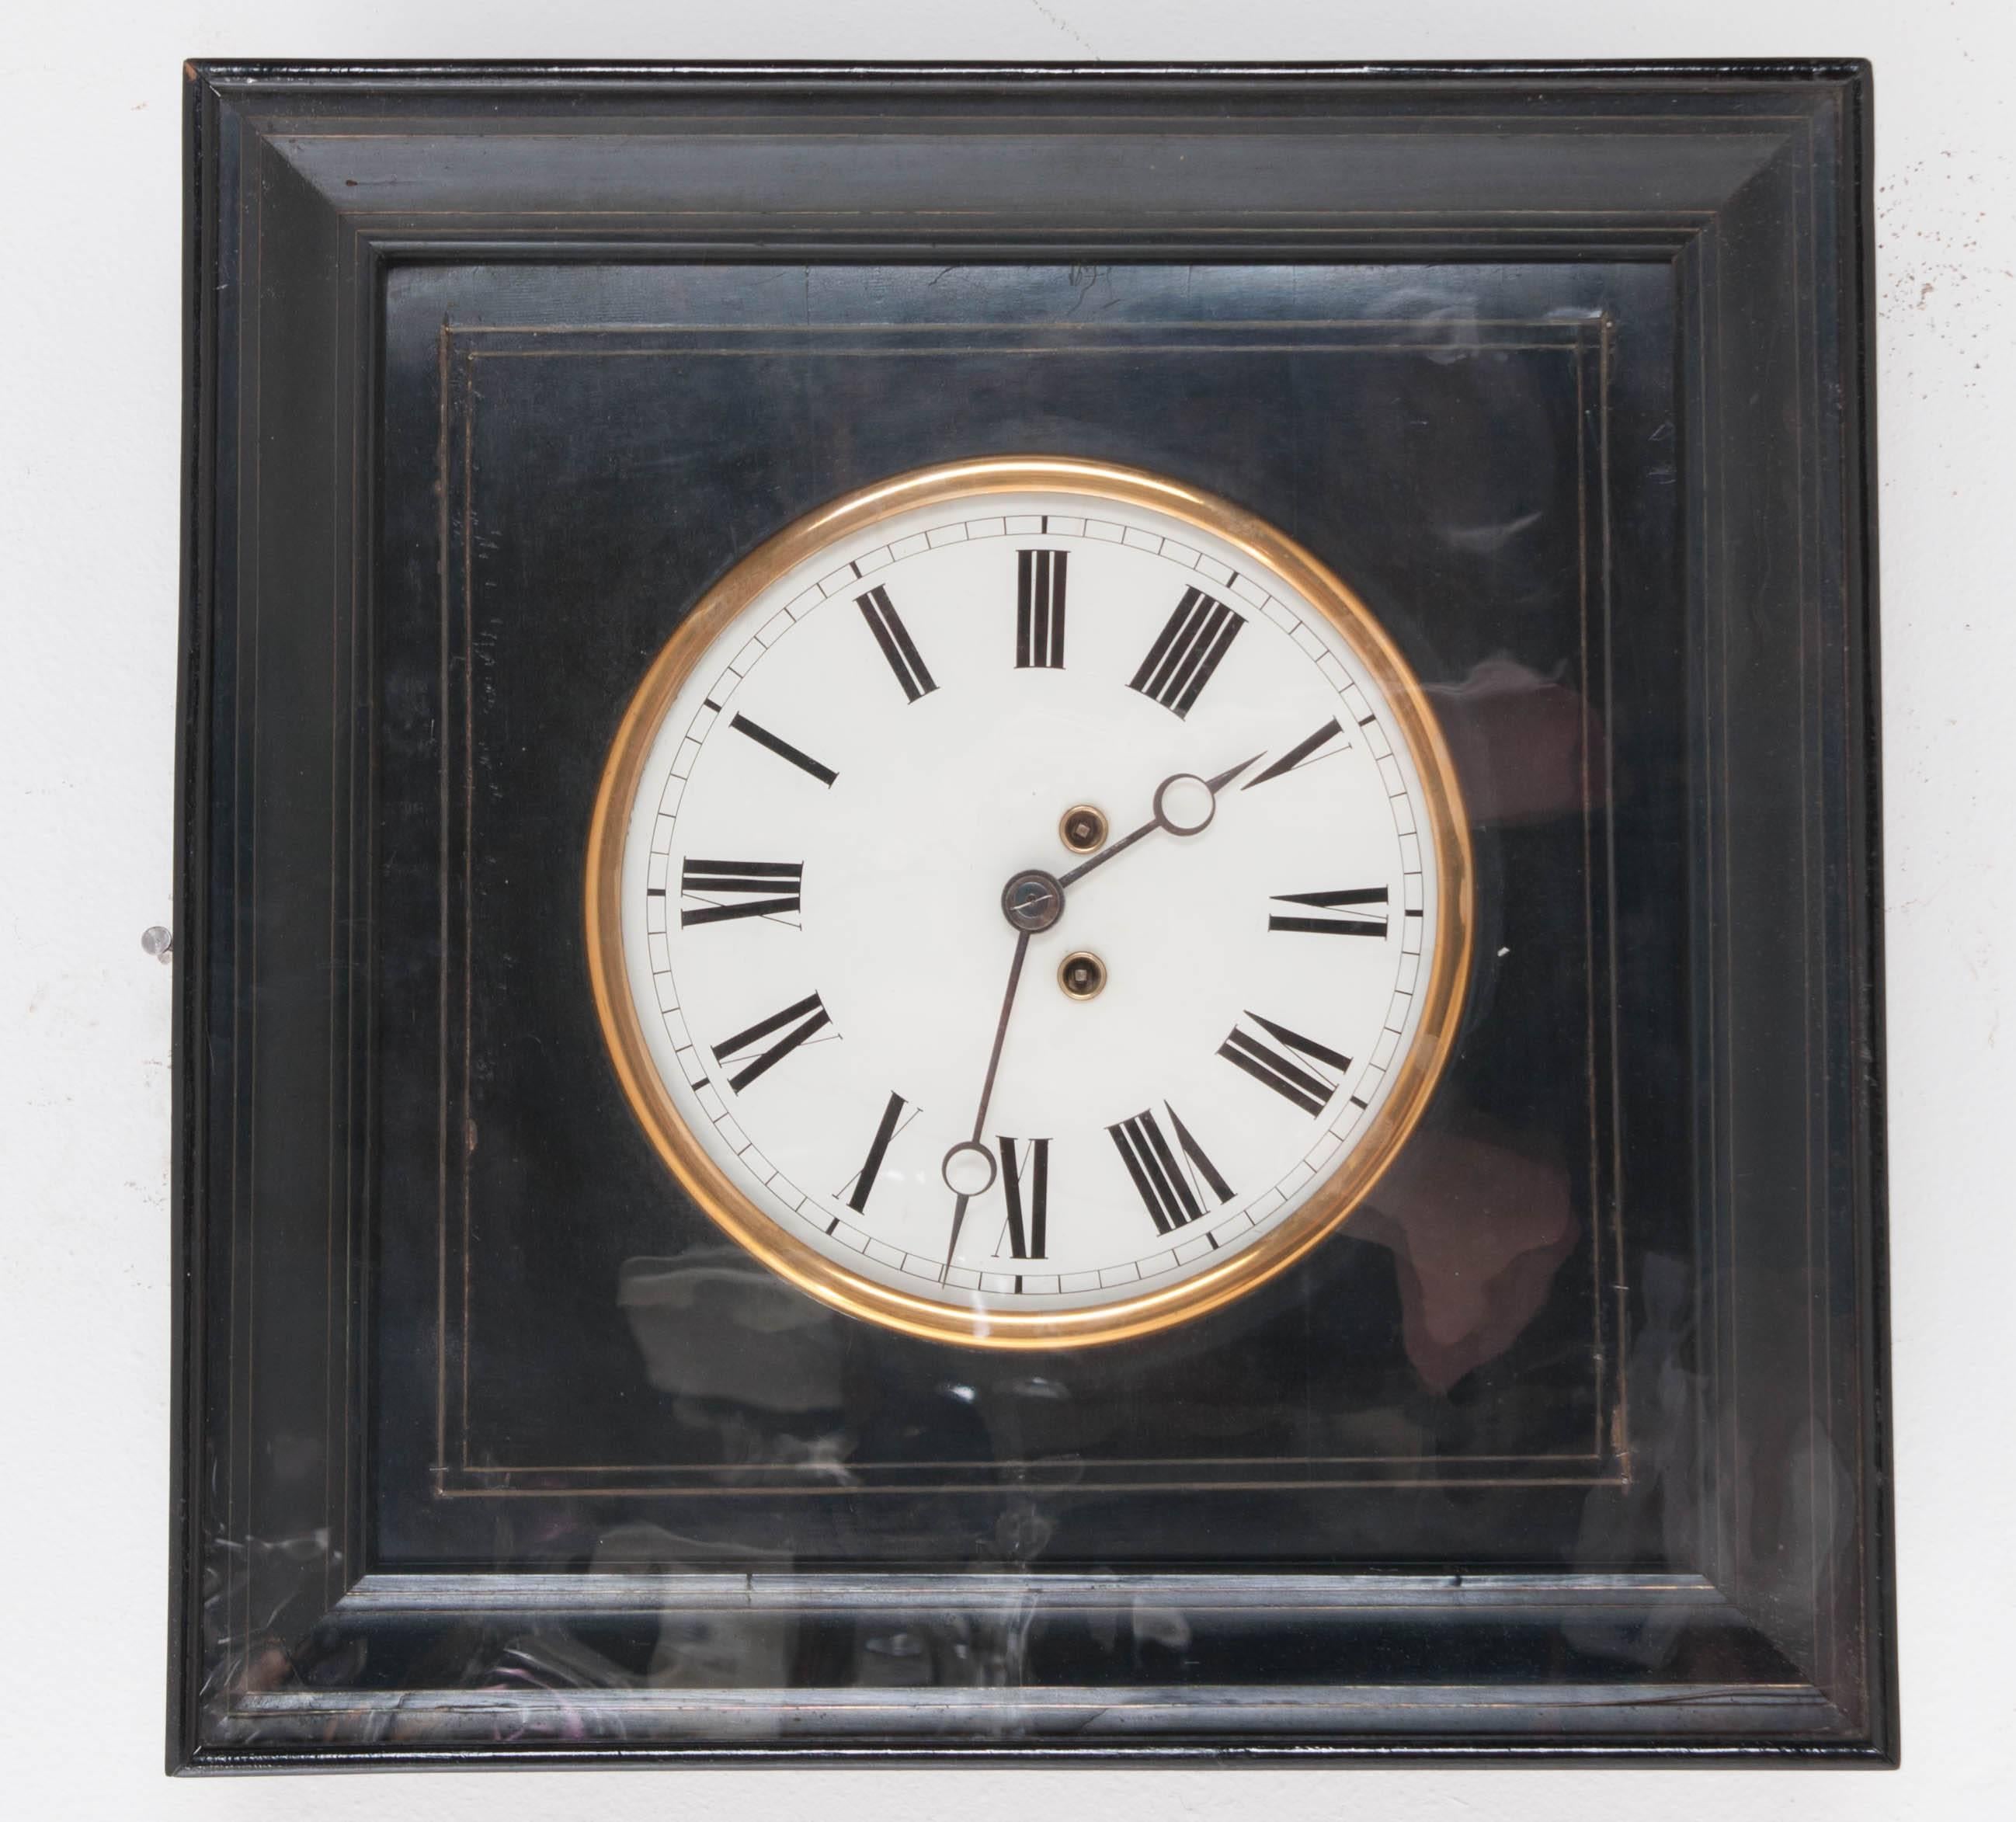 A stunning French wall clock in a square ebony frame, cleaned with its working parts. Surrounded by a brilliant brass ring, the clock's white face stands out vividly against the ebony casing. Thin, inlay brass strips border the interior frame